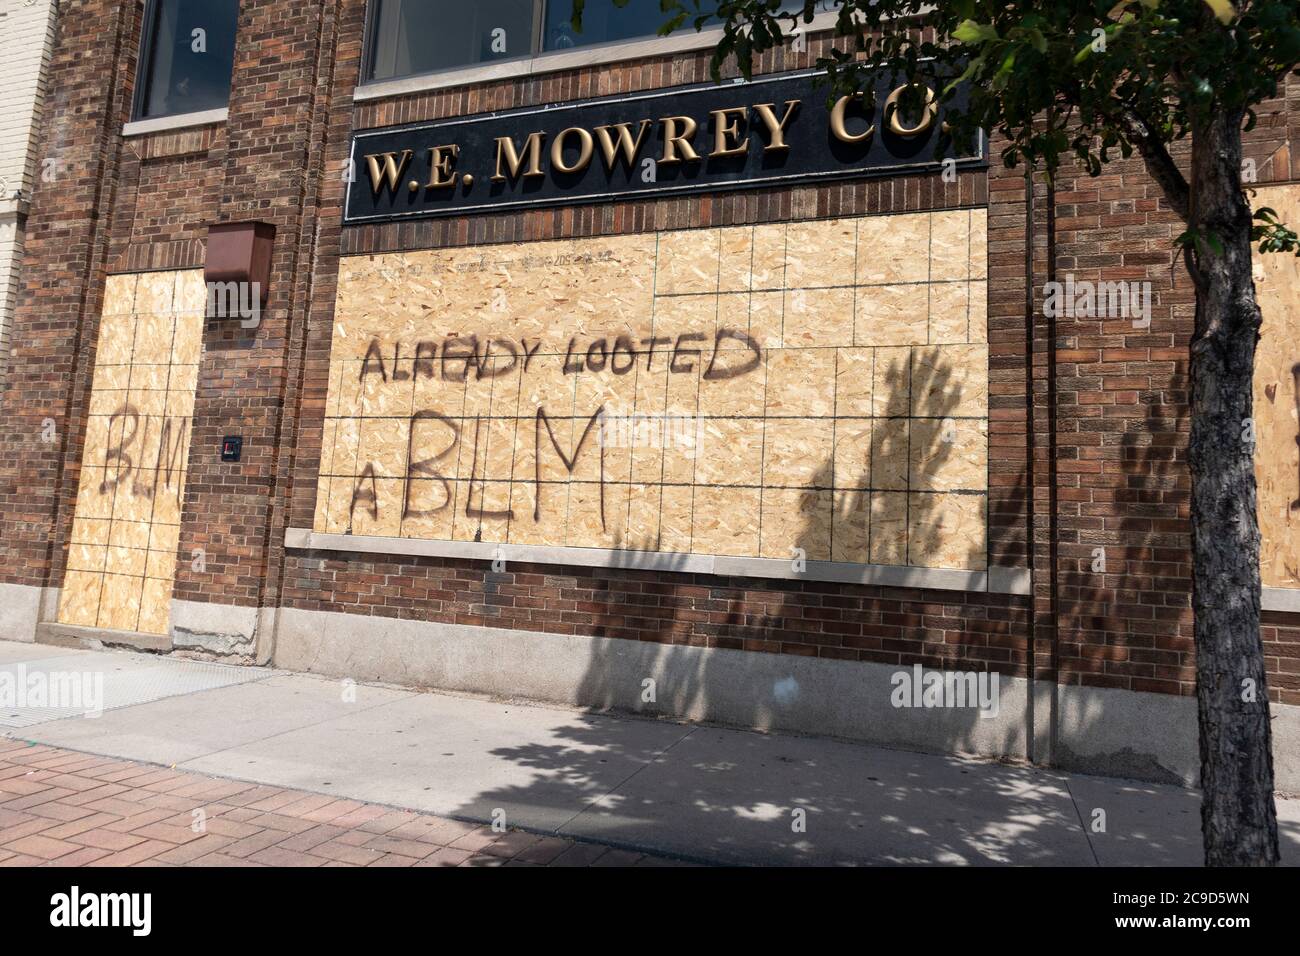 Business wanting to avoid destruction of building covered windows with plywood and claimed 'Already Looted'. St Paul Minnesota MN USA Stock Photo